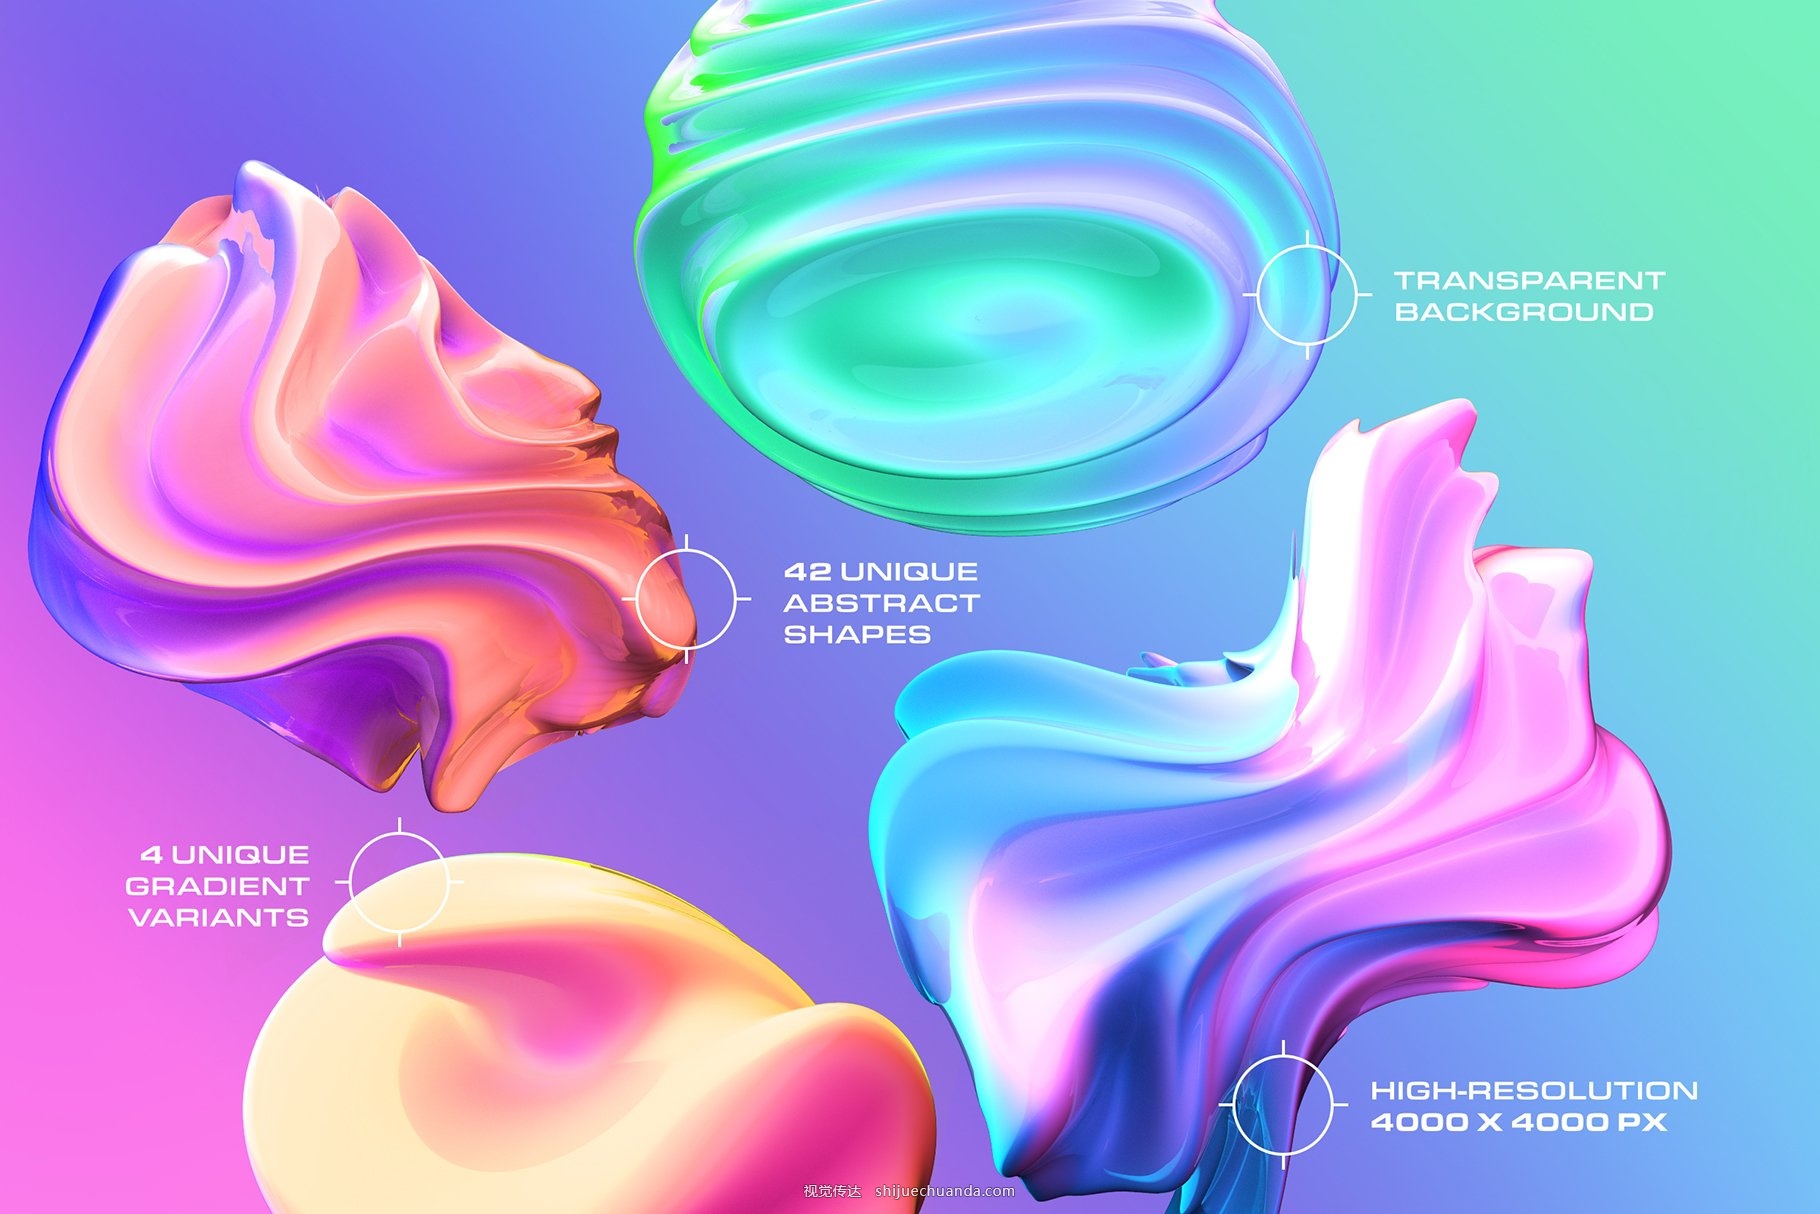 3D Gradient Abstract Shapes-9.jpg